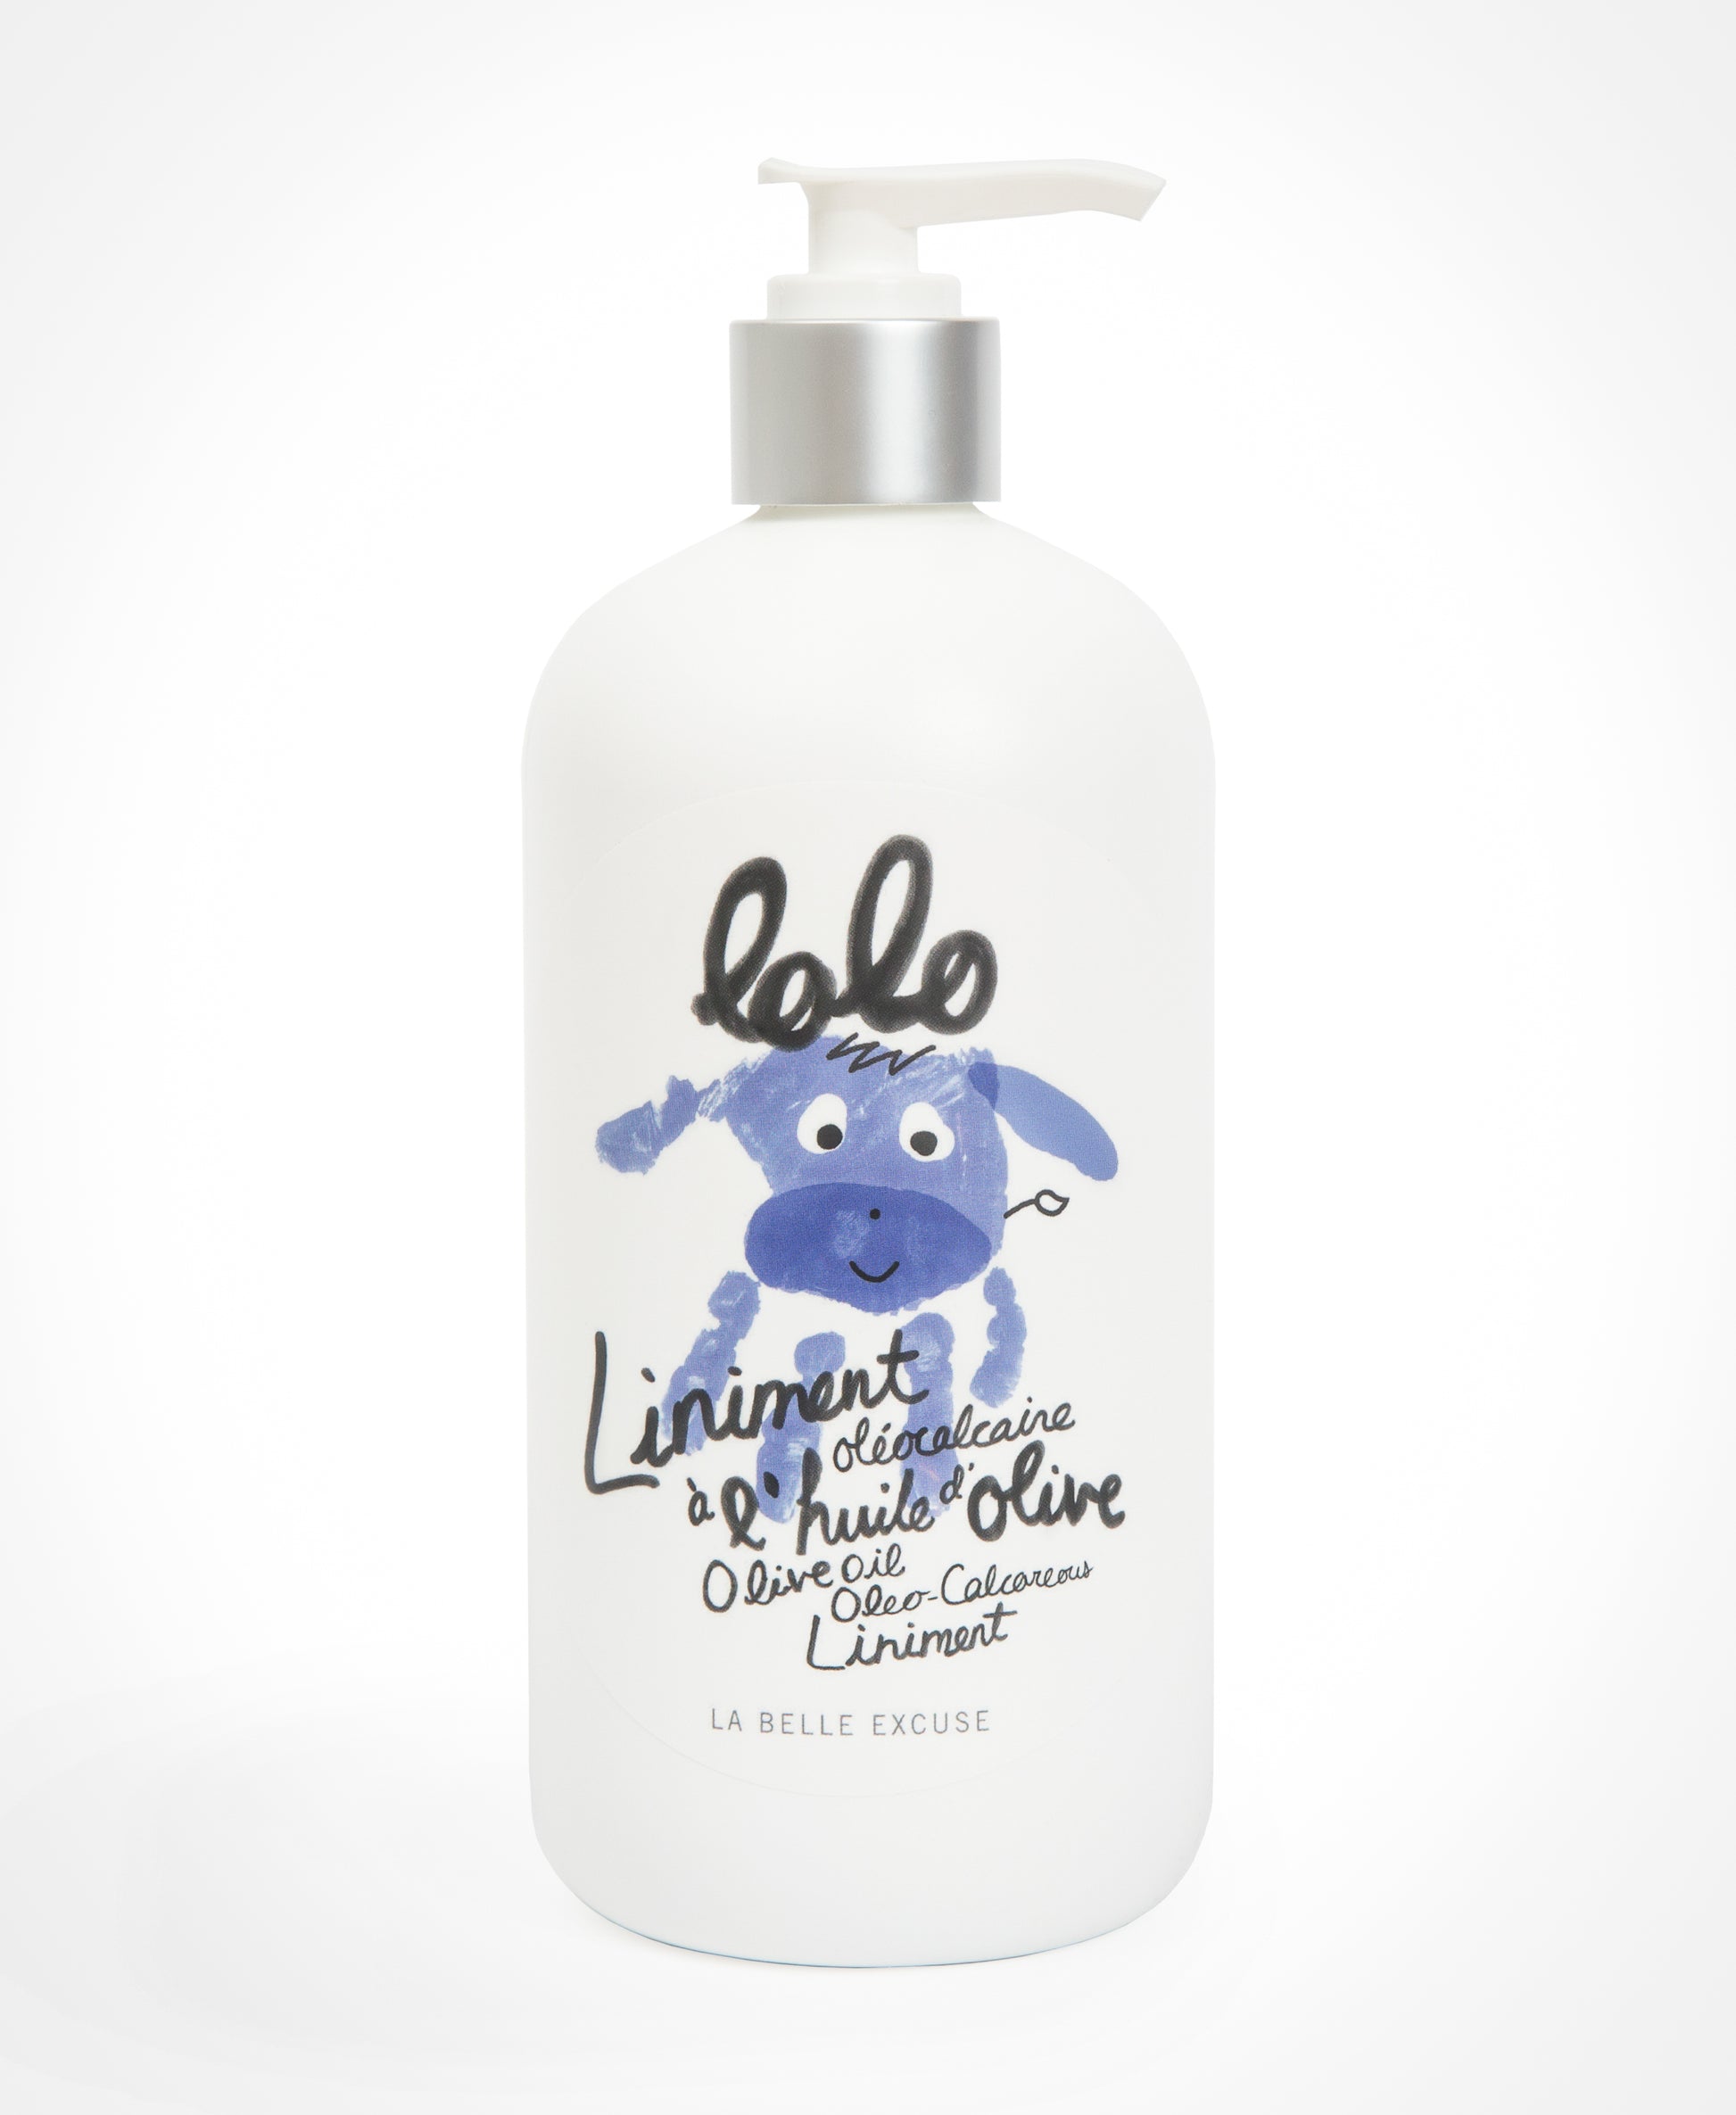 Gentle Oleo-Calcareous Liniment - How to Use the Star of Your Baby Toiletry  Bag